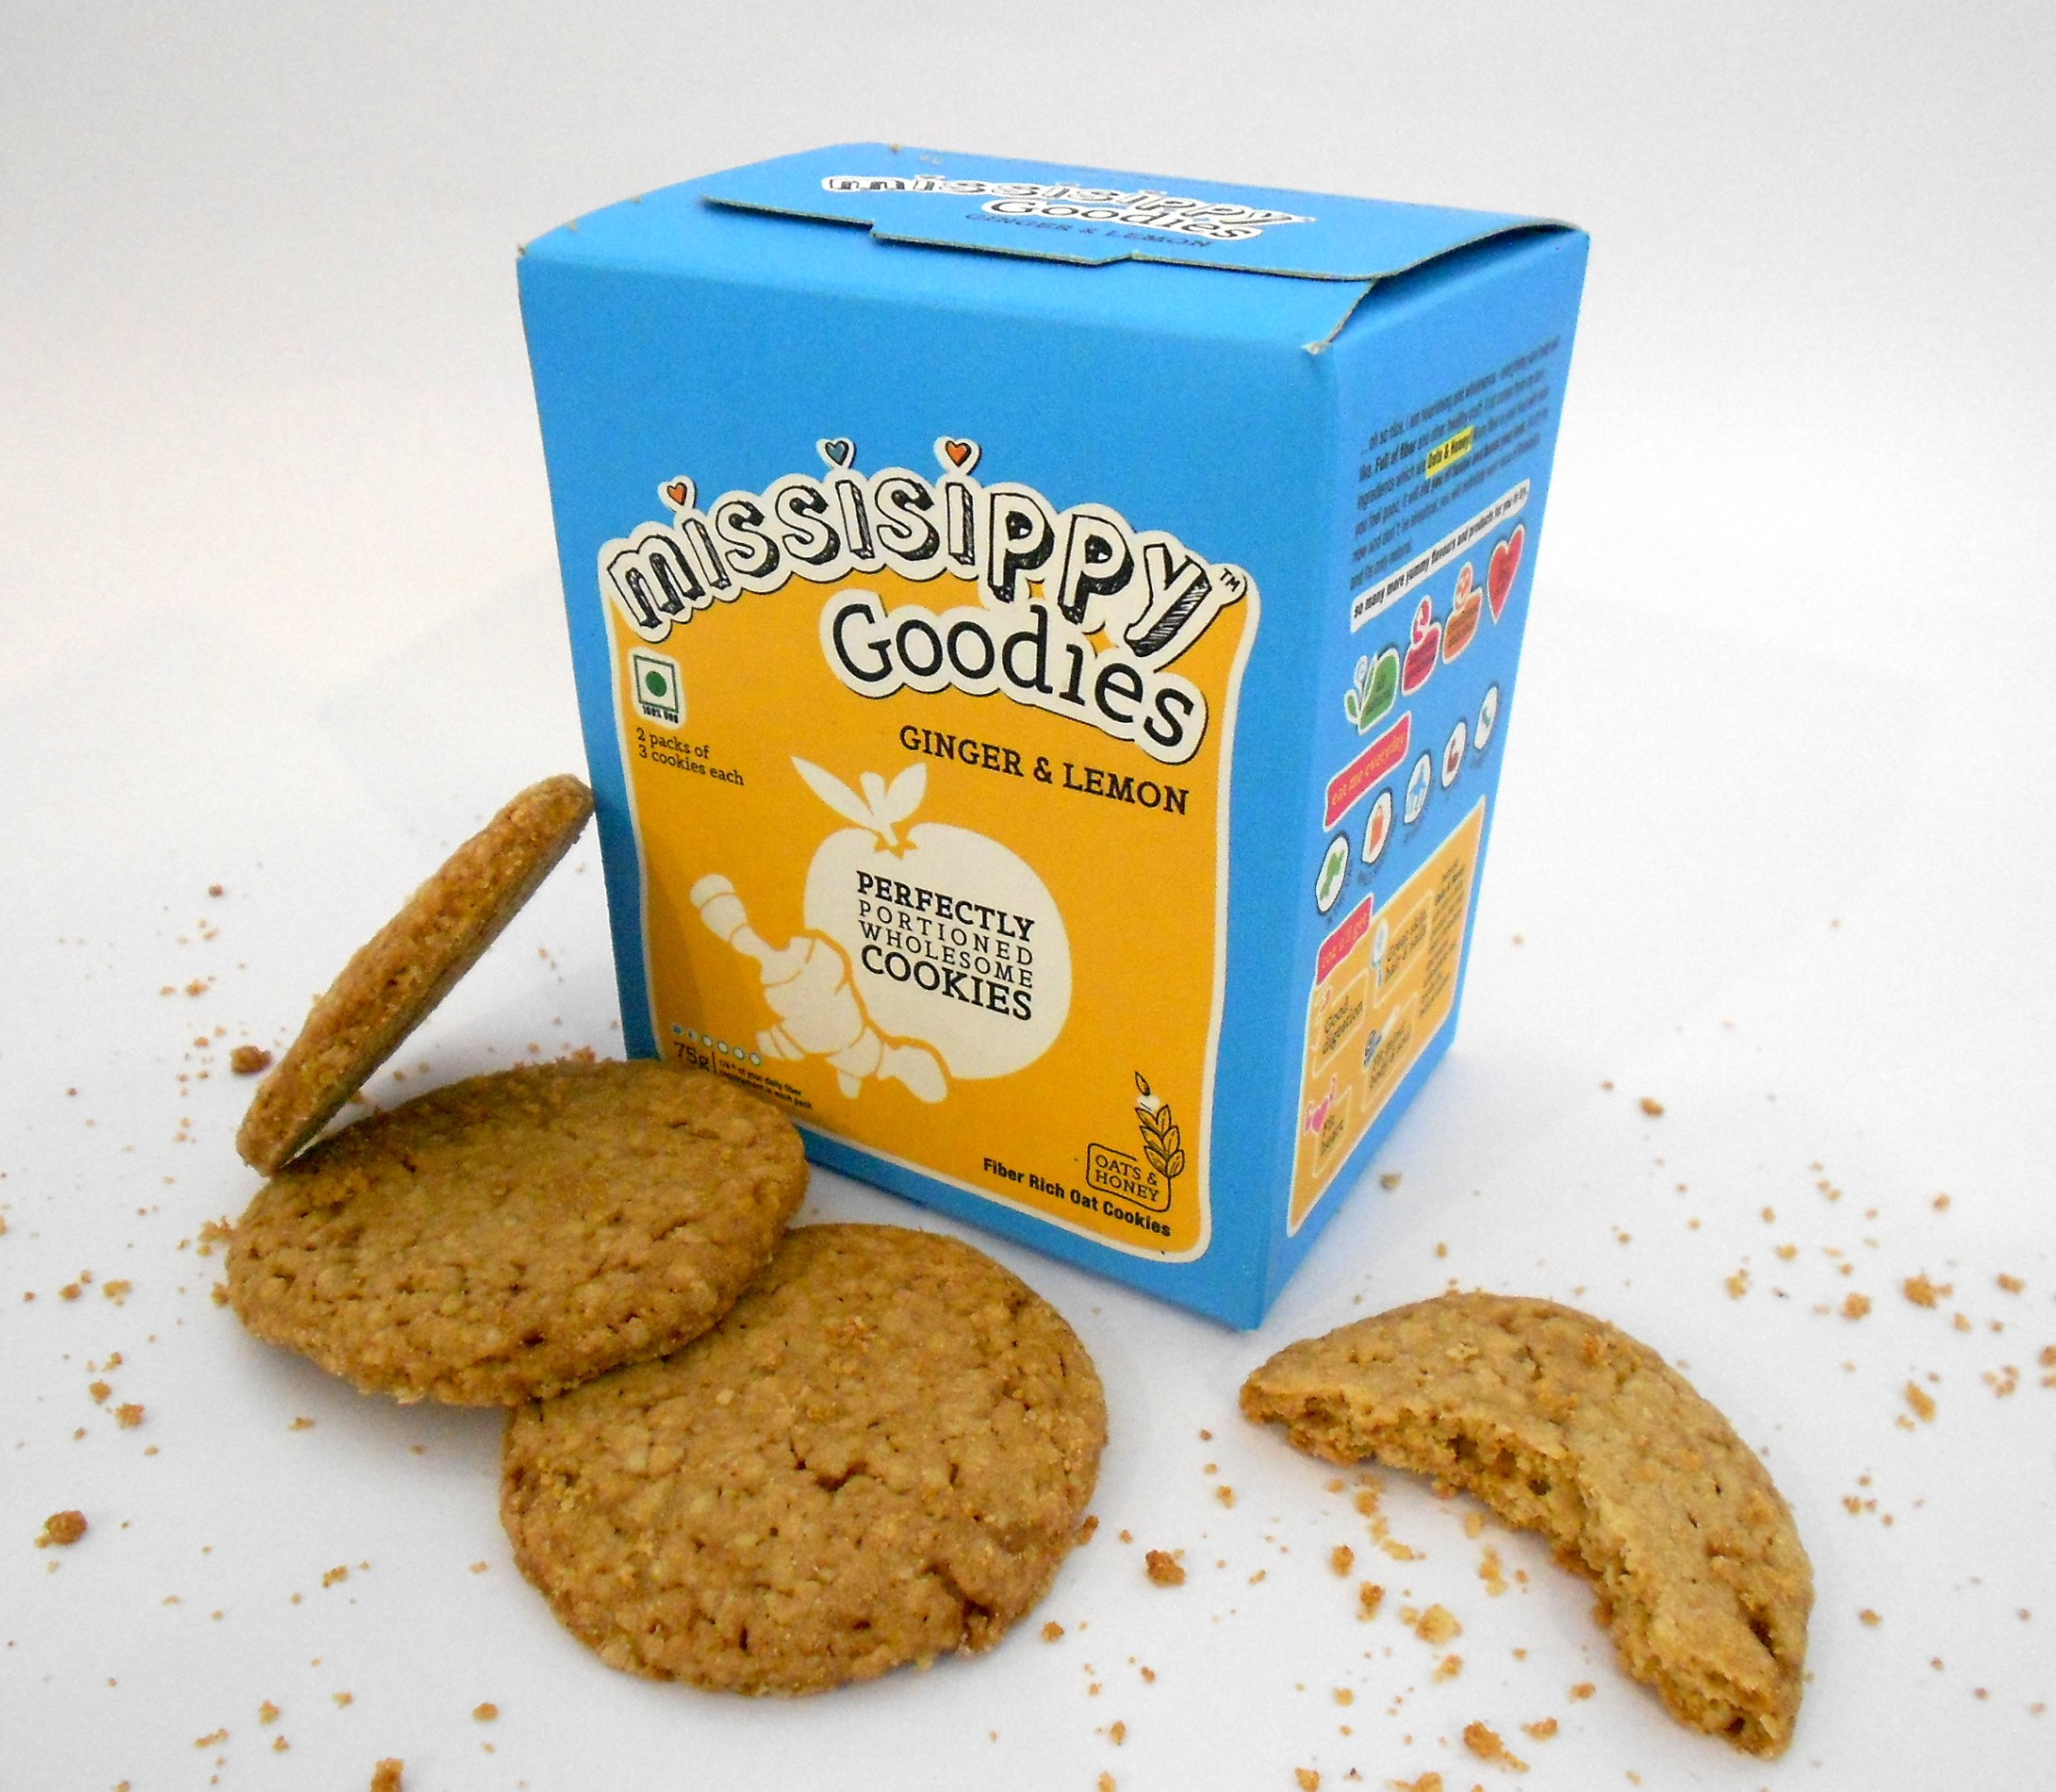 Missisippy - Goodies Cookies - Ginger 75 gm Pack